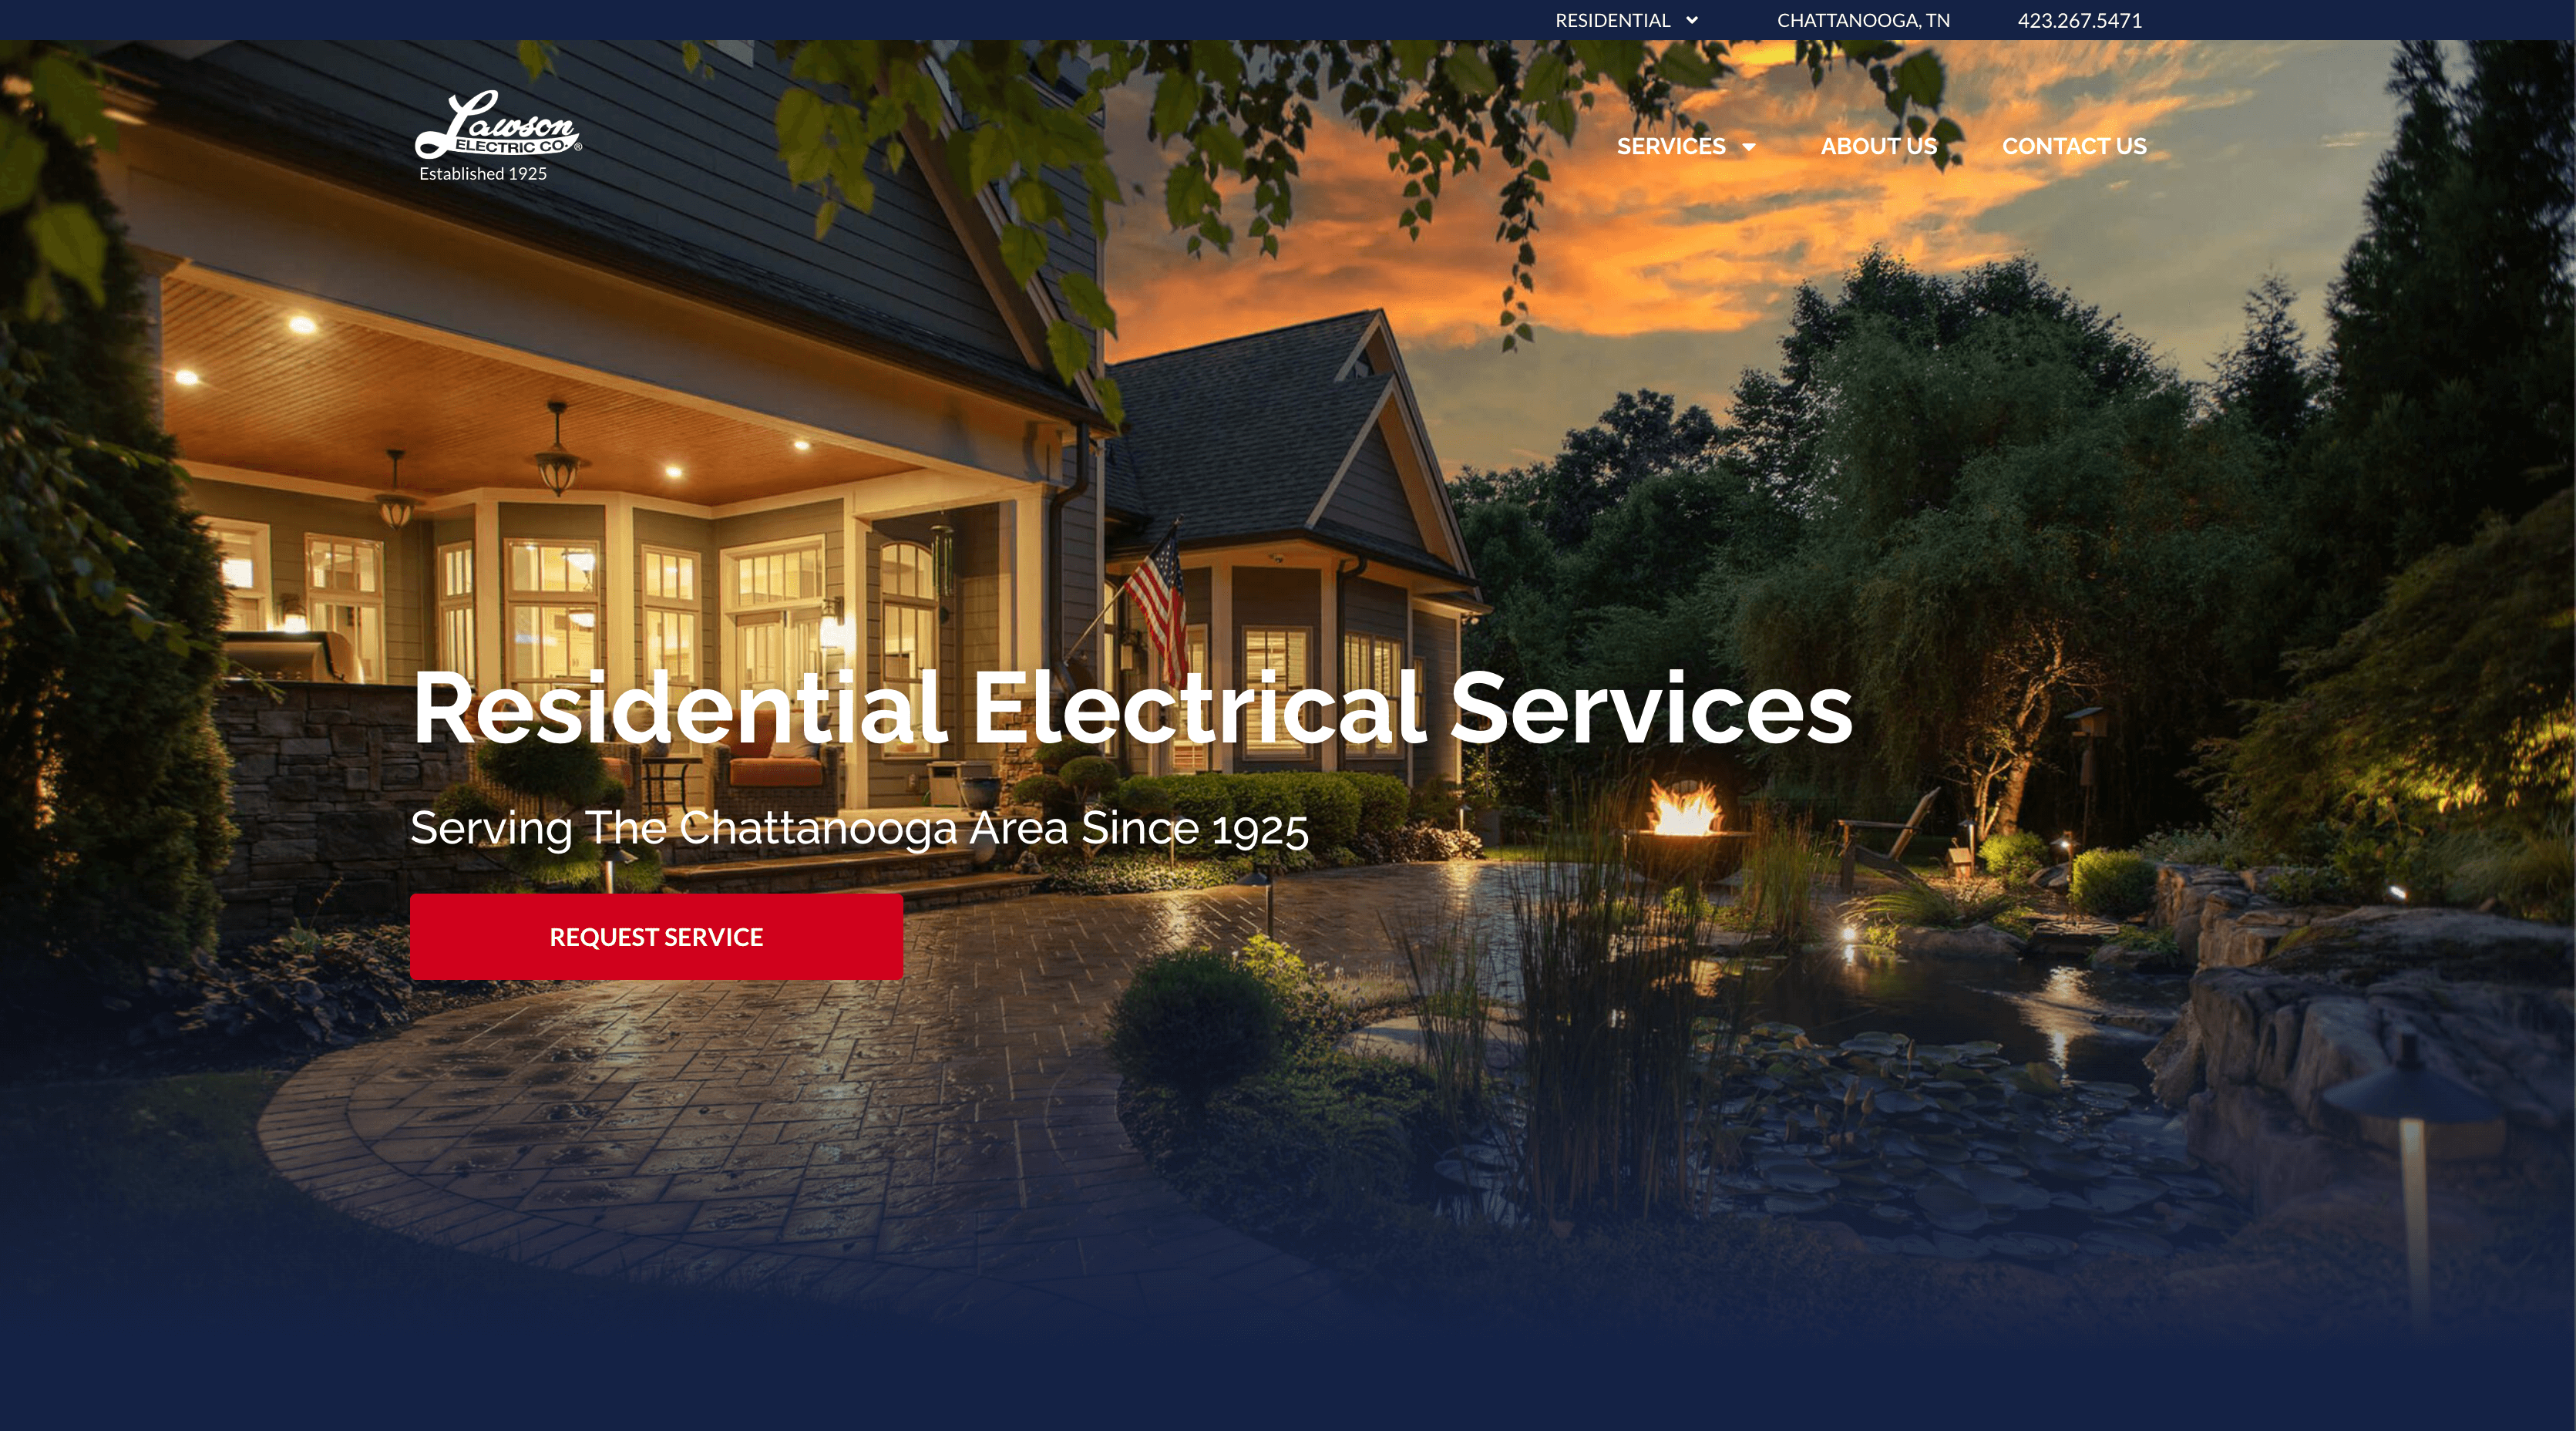 Lawson Electric Residential Website Homepage Design